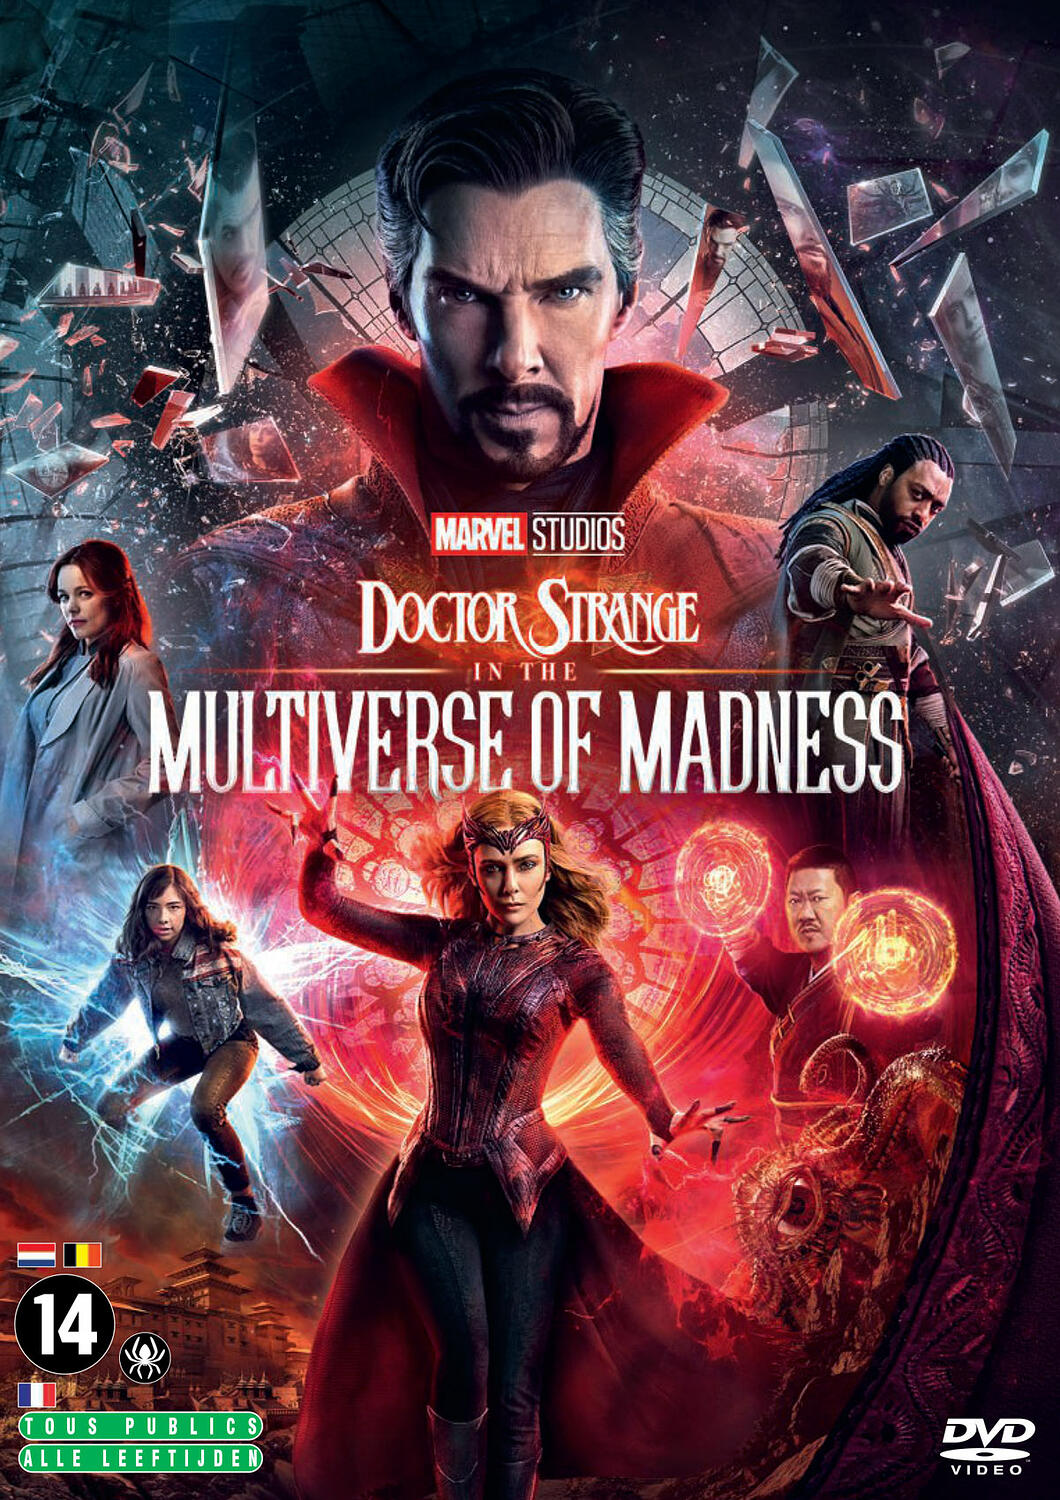 Couverture de : Doctor Strange in the Multiverse of Madness